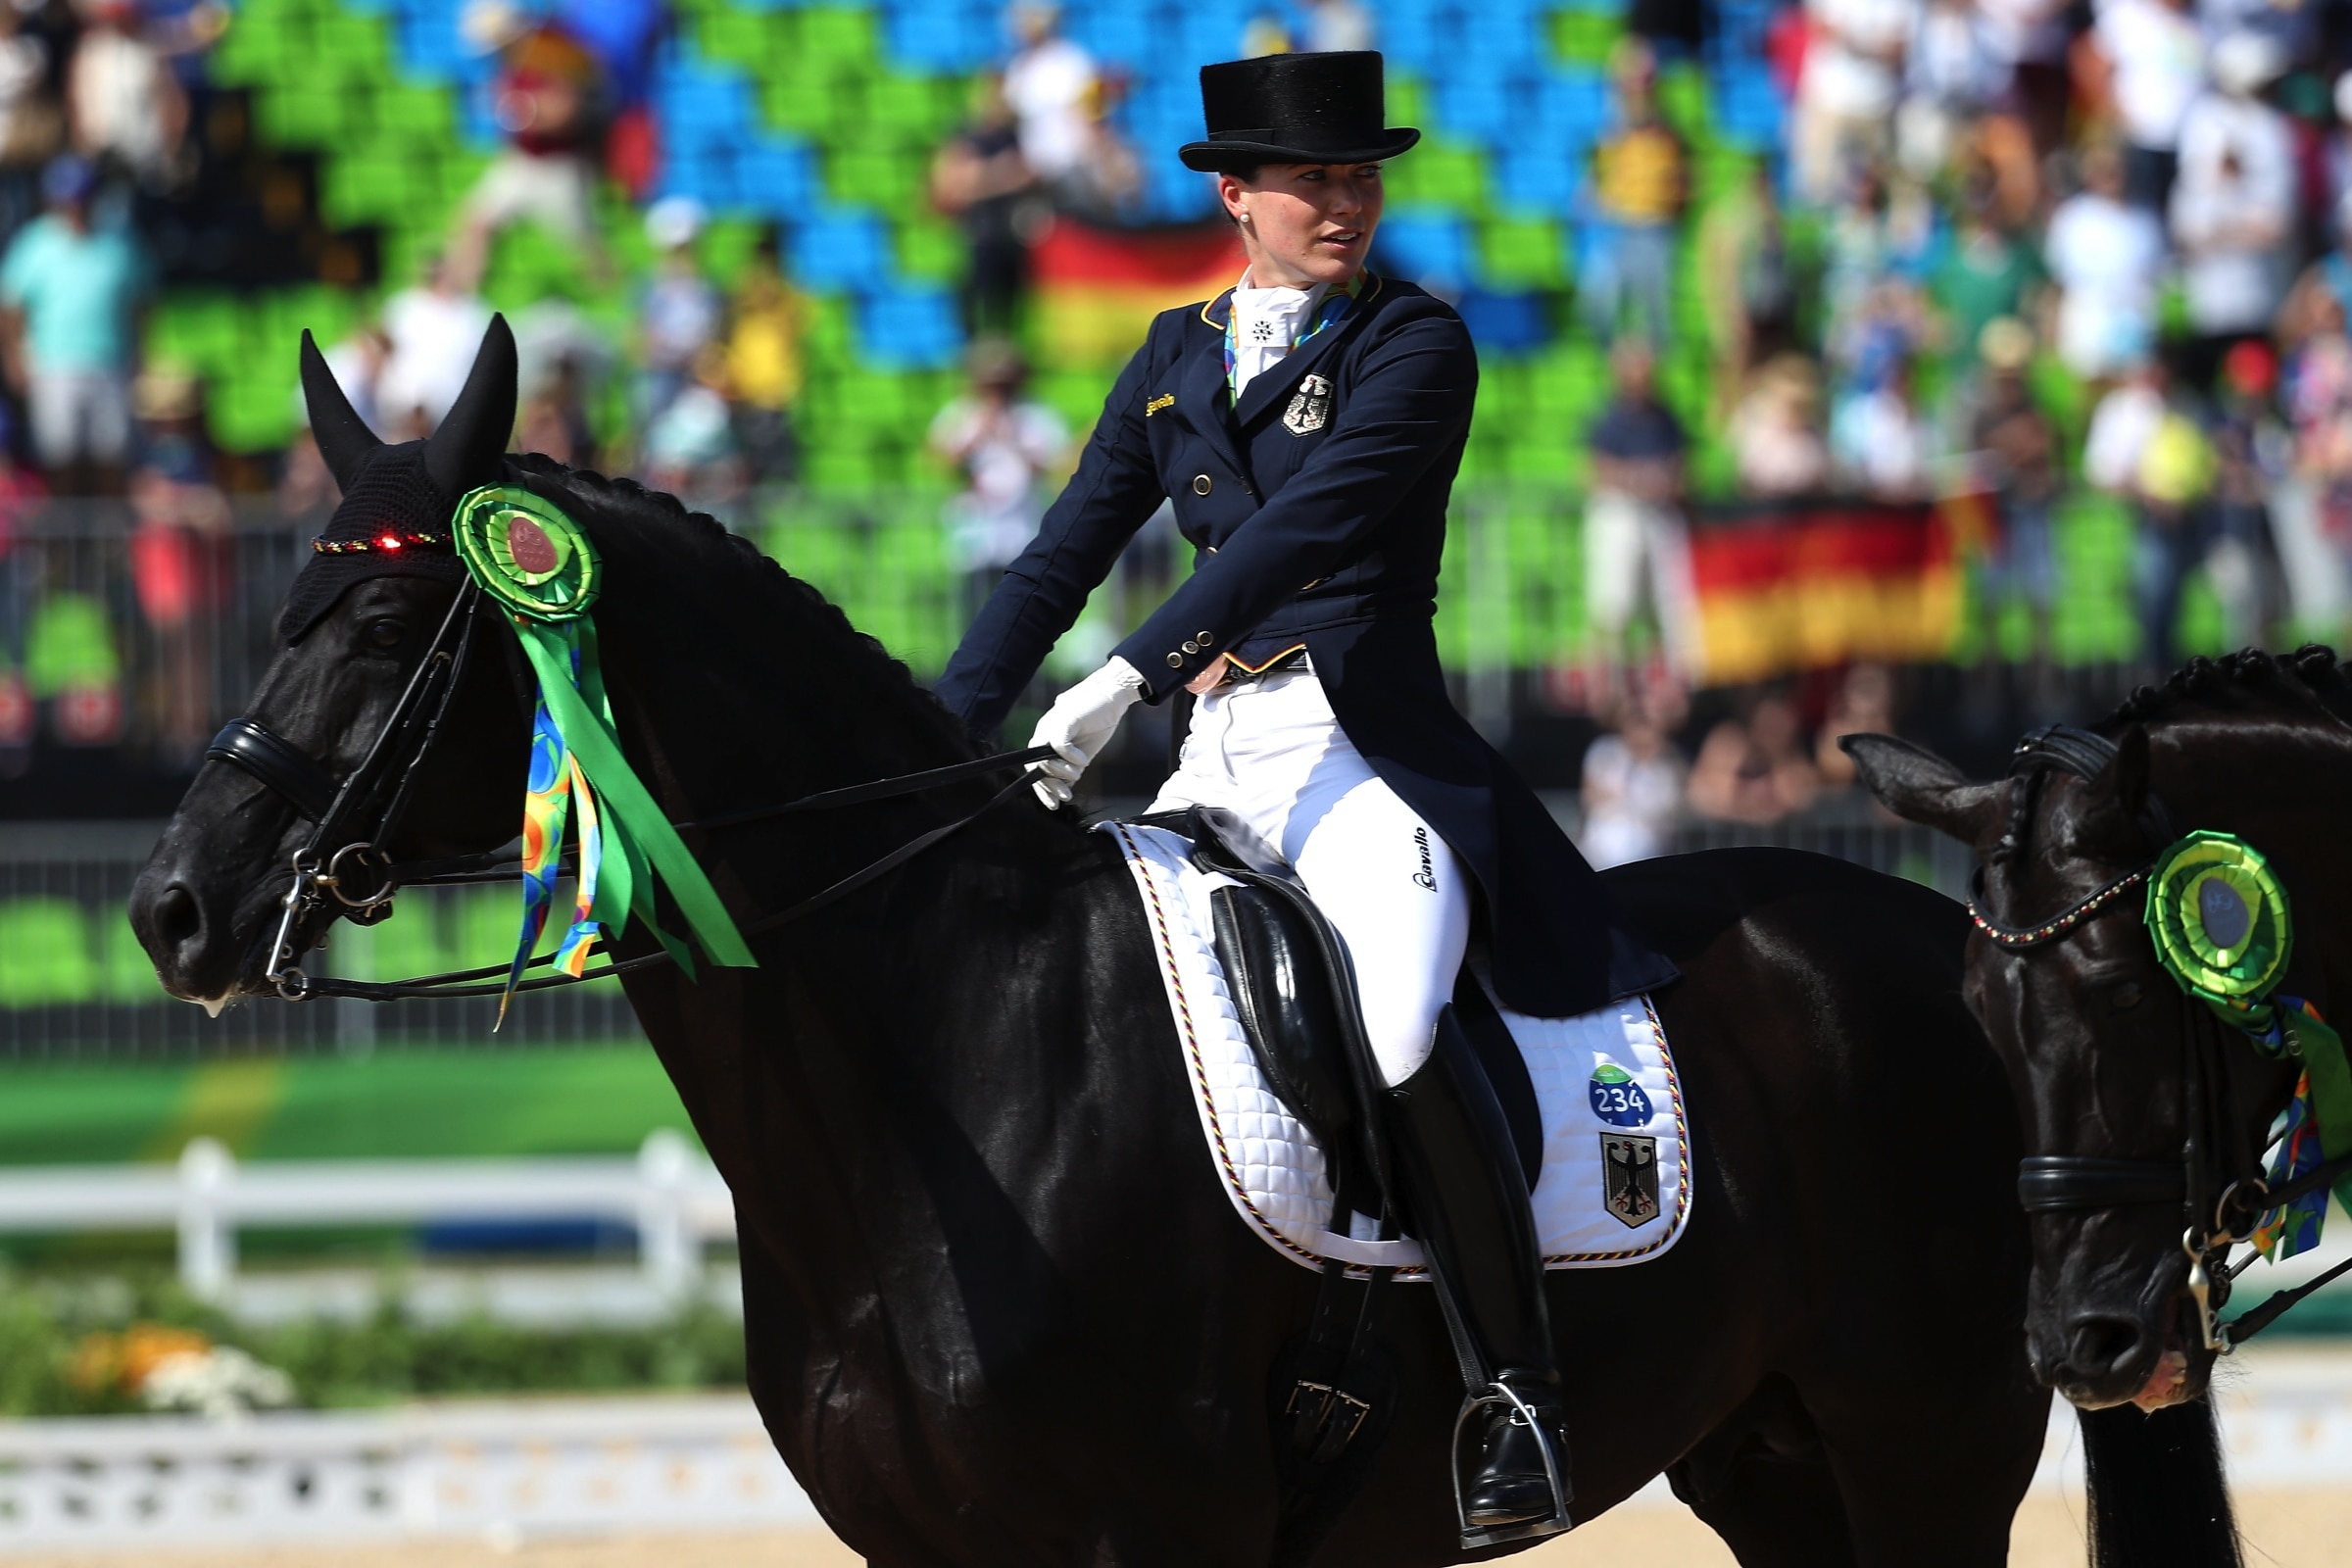 Dressage: IPACS, Kristina Broring-Sprehe and her top horse, a German dressage rider, Olympic level. 2400x1600 HD Wallpaper.